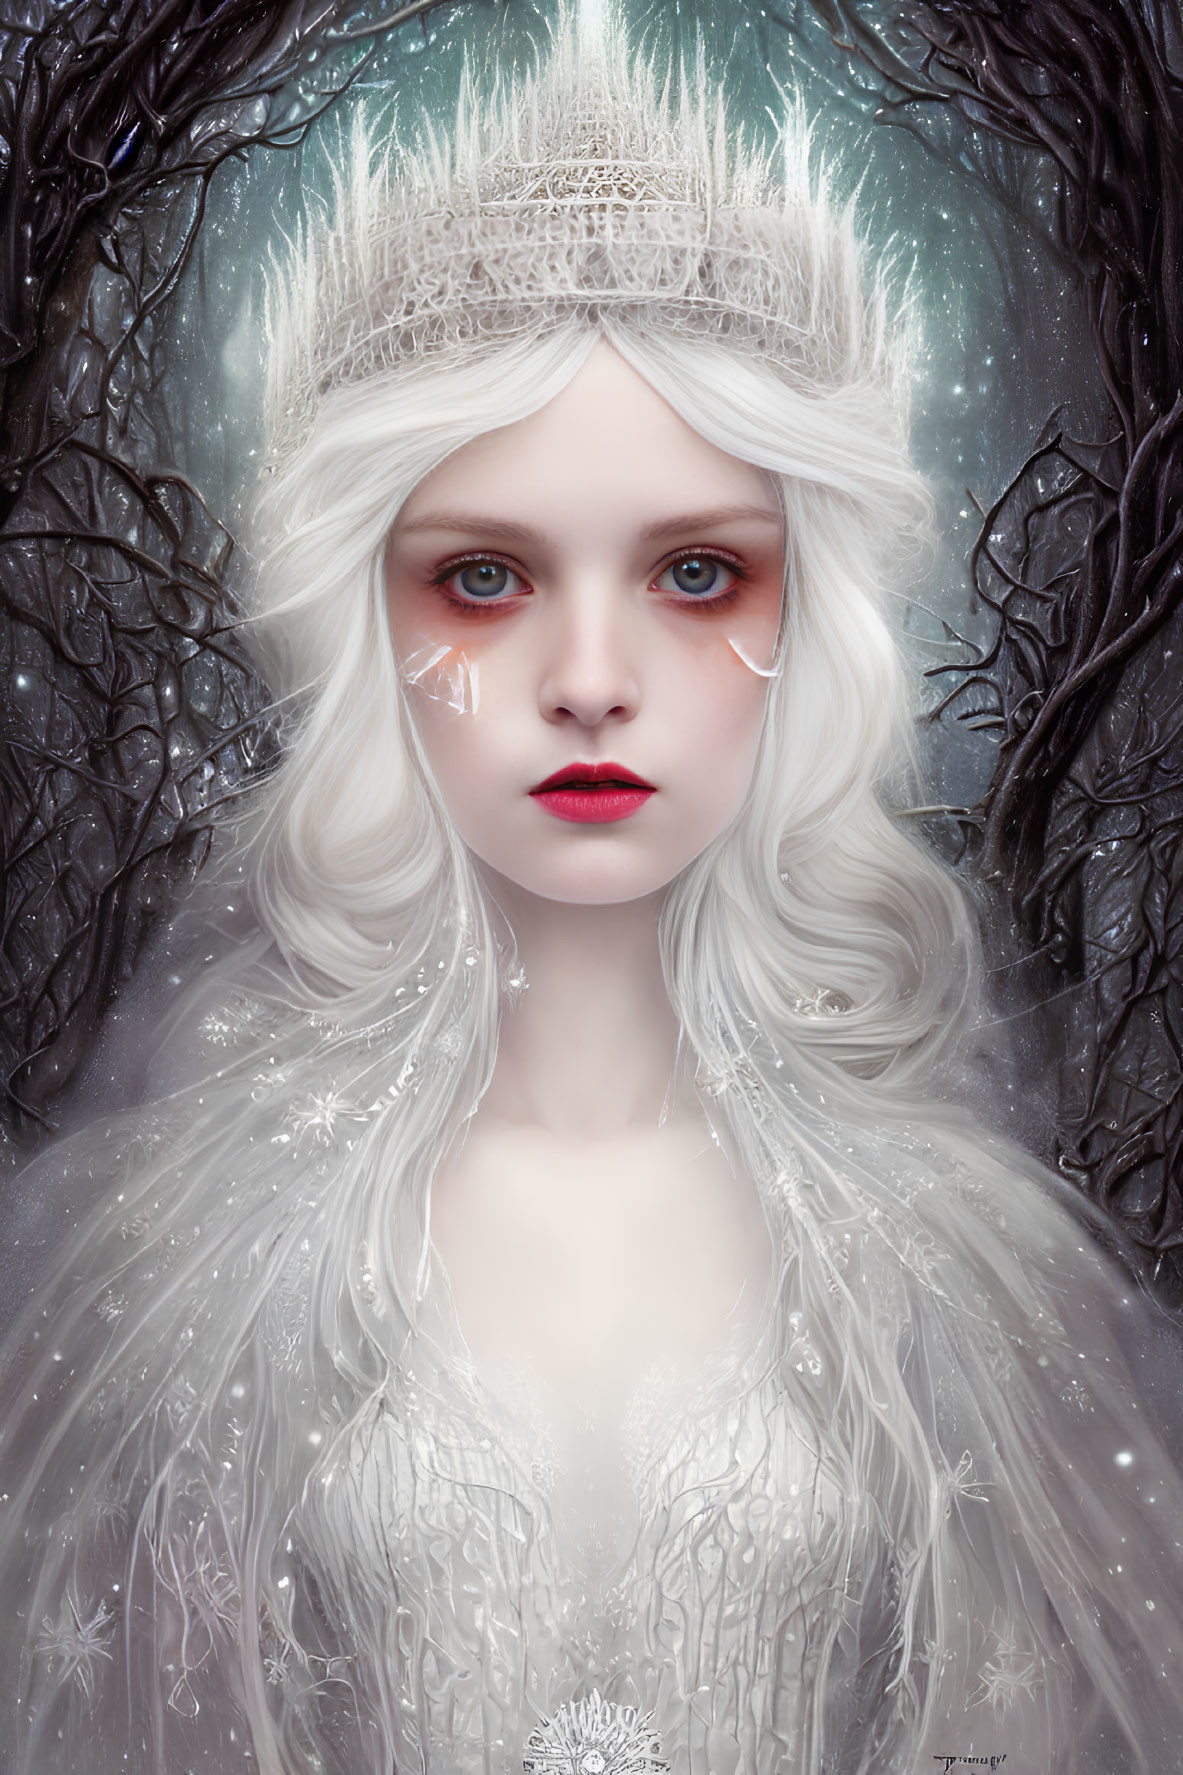 Pale-skinned woman in crystal crown and snowflake dress in ethereal forest